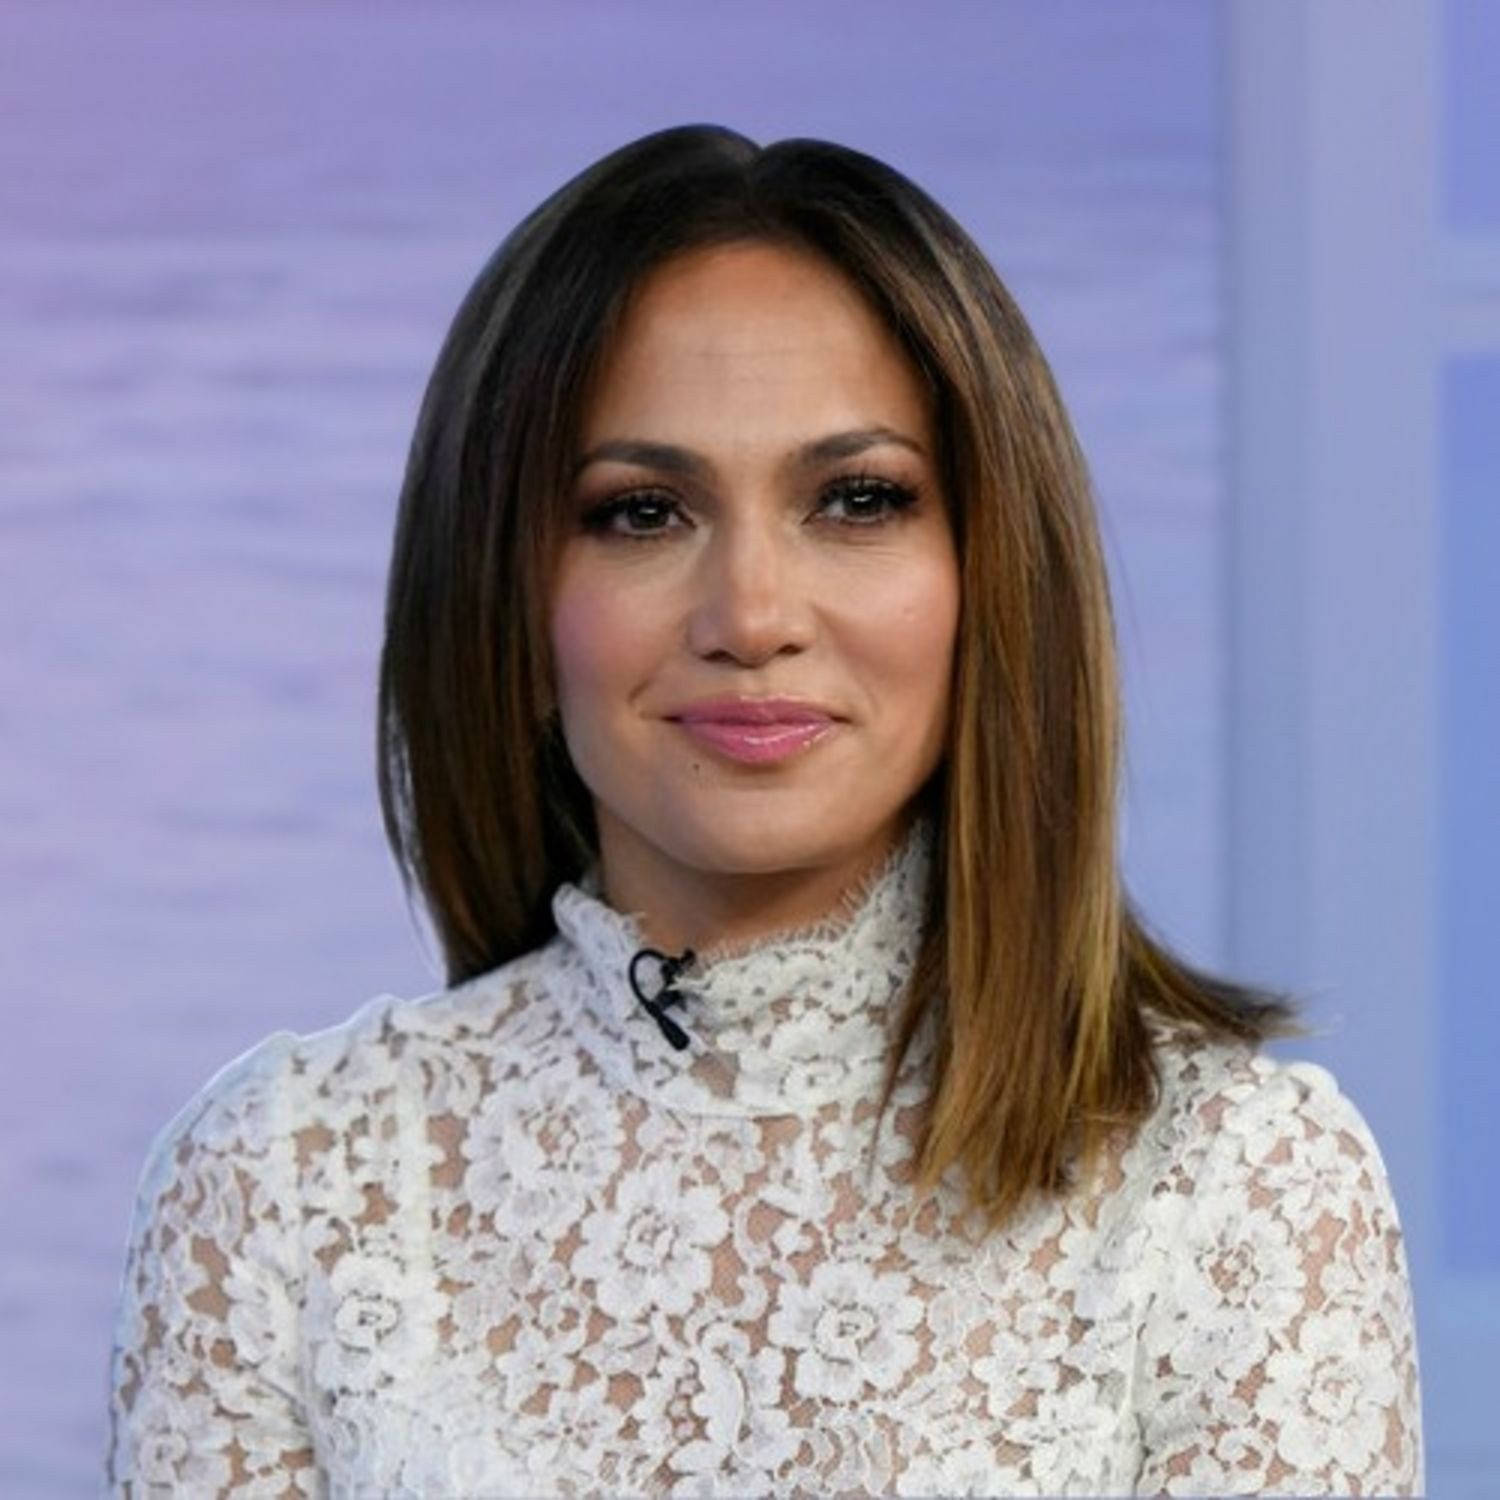 Jennifer Lopez Looks Sophisticated With Her Straight Bob. Wallpaper